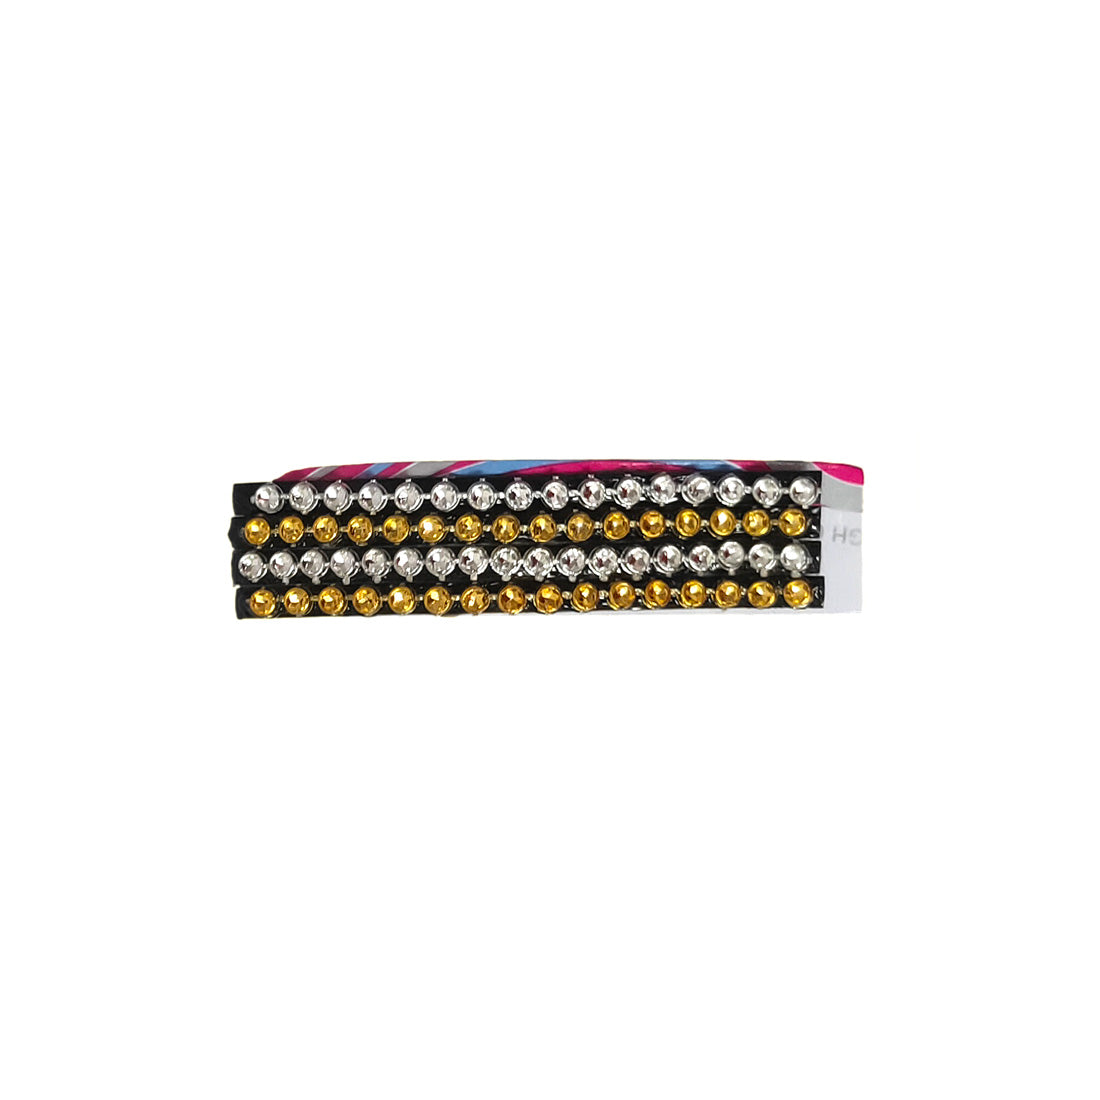 Anokhi Ada Handmade Fancy Bobby Pins for Girls and Women for Occasion (Combo Of 4 Bobby Pins, ZM-01 Bobby Pins)